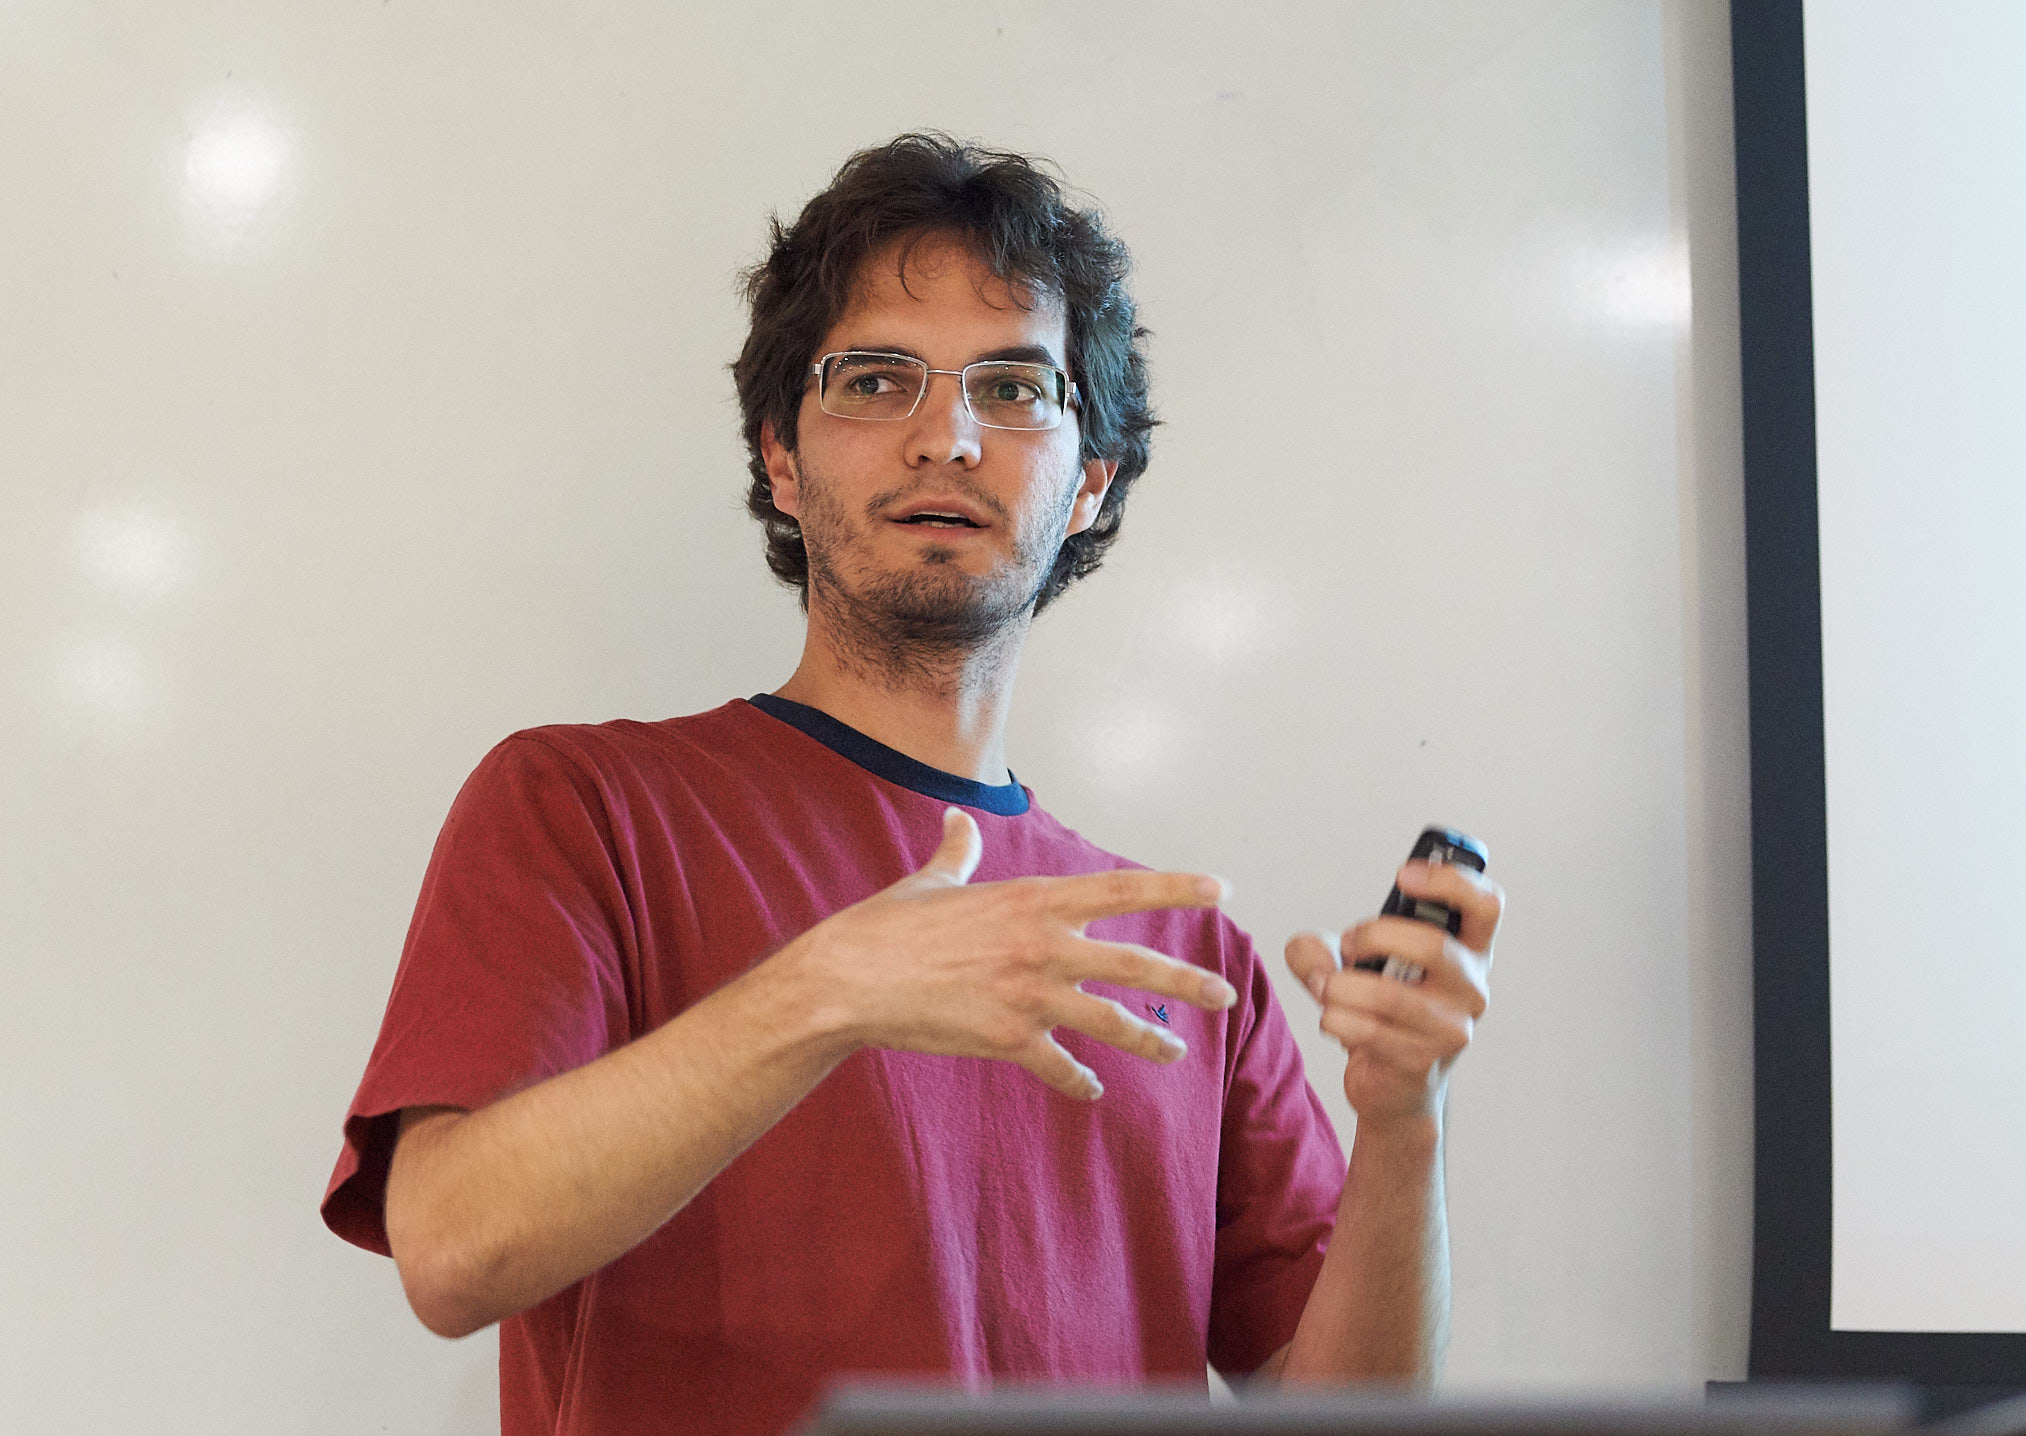 Unit postdoctoral scientist Vitor Lopes dos Santos explains the need to be rigorous and creative when analyzing data.